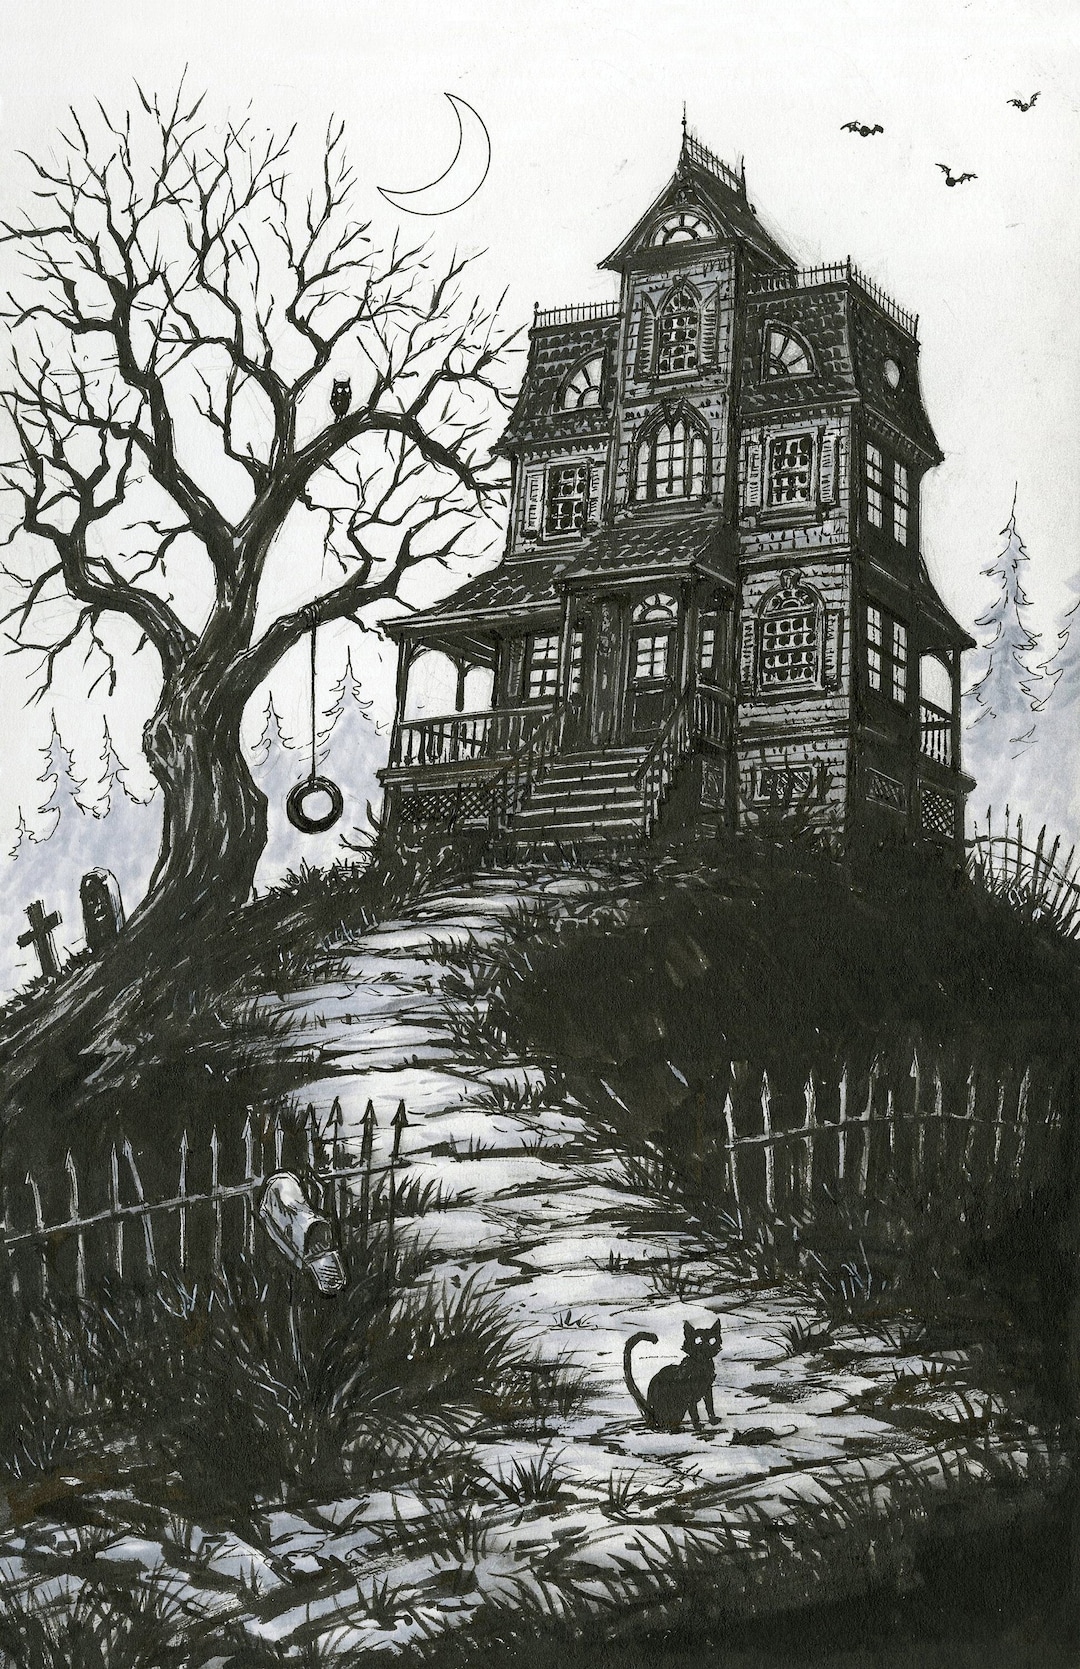 Haunted house design, White pen on black paper, louisaclare10